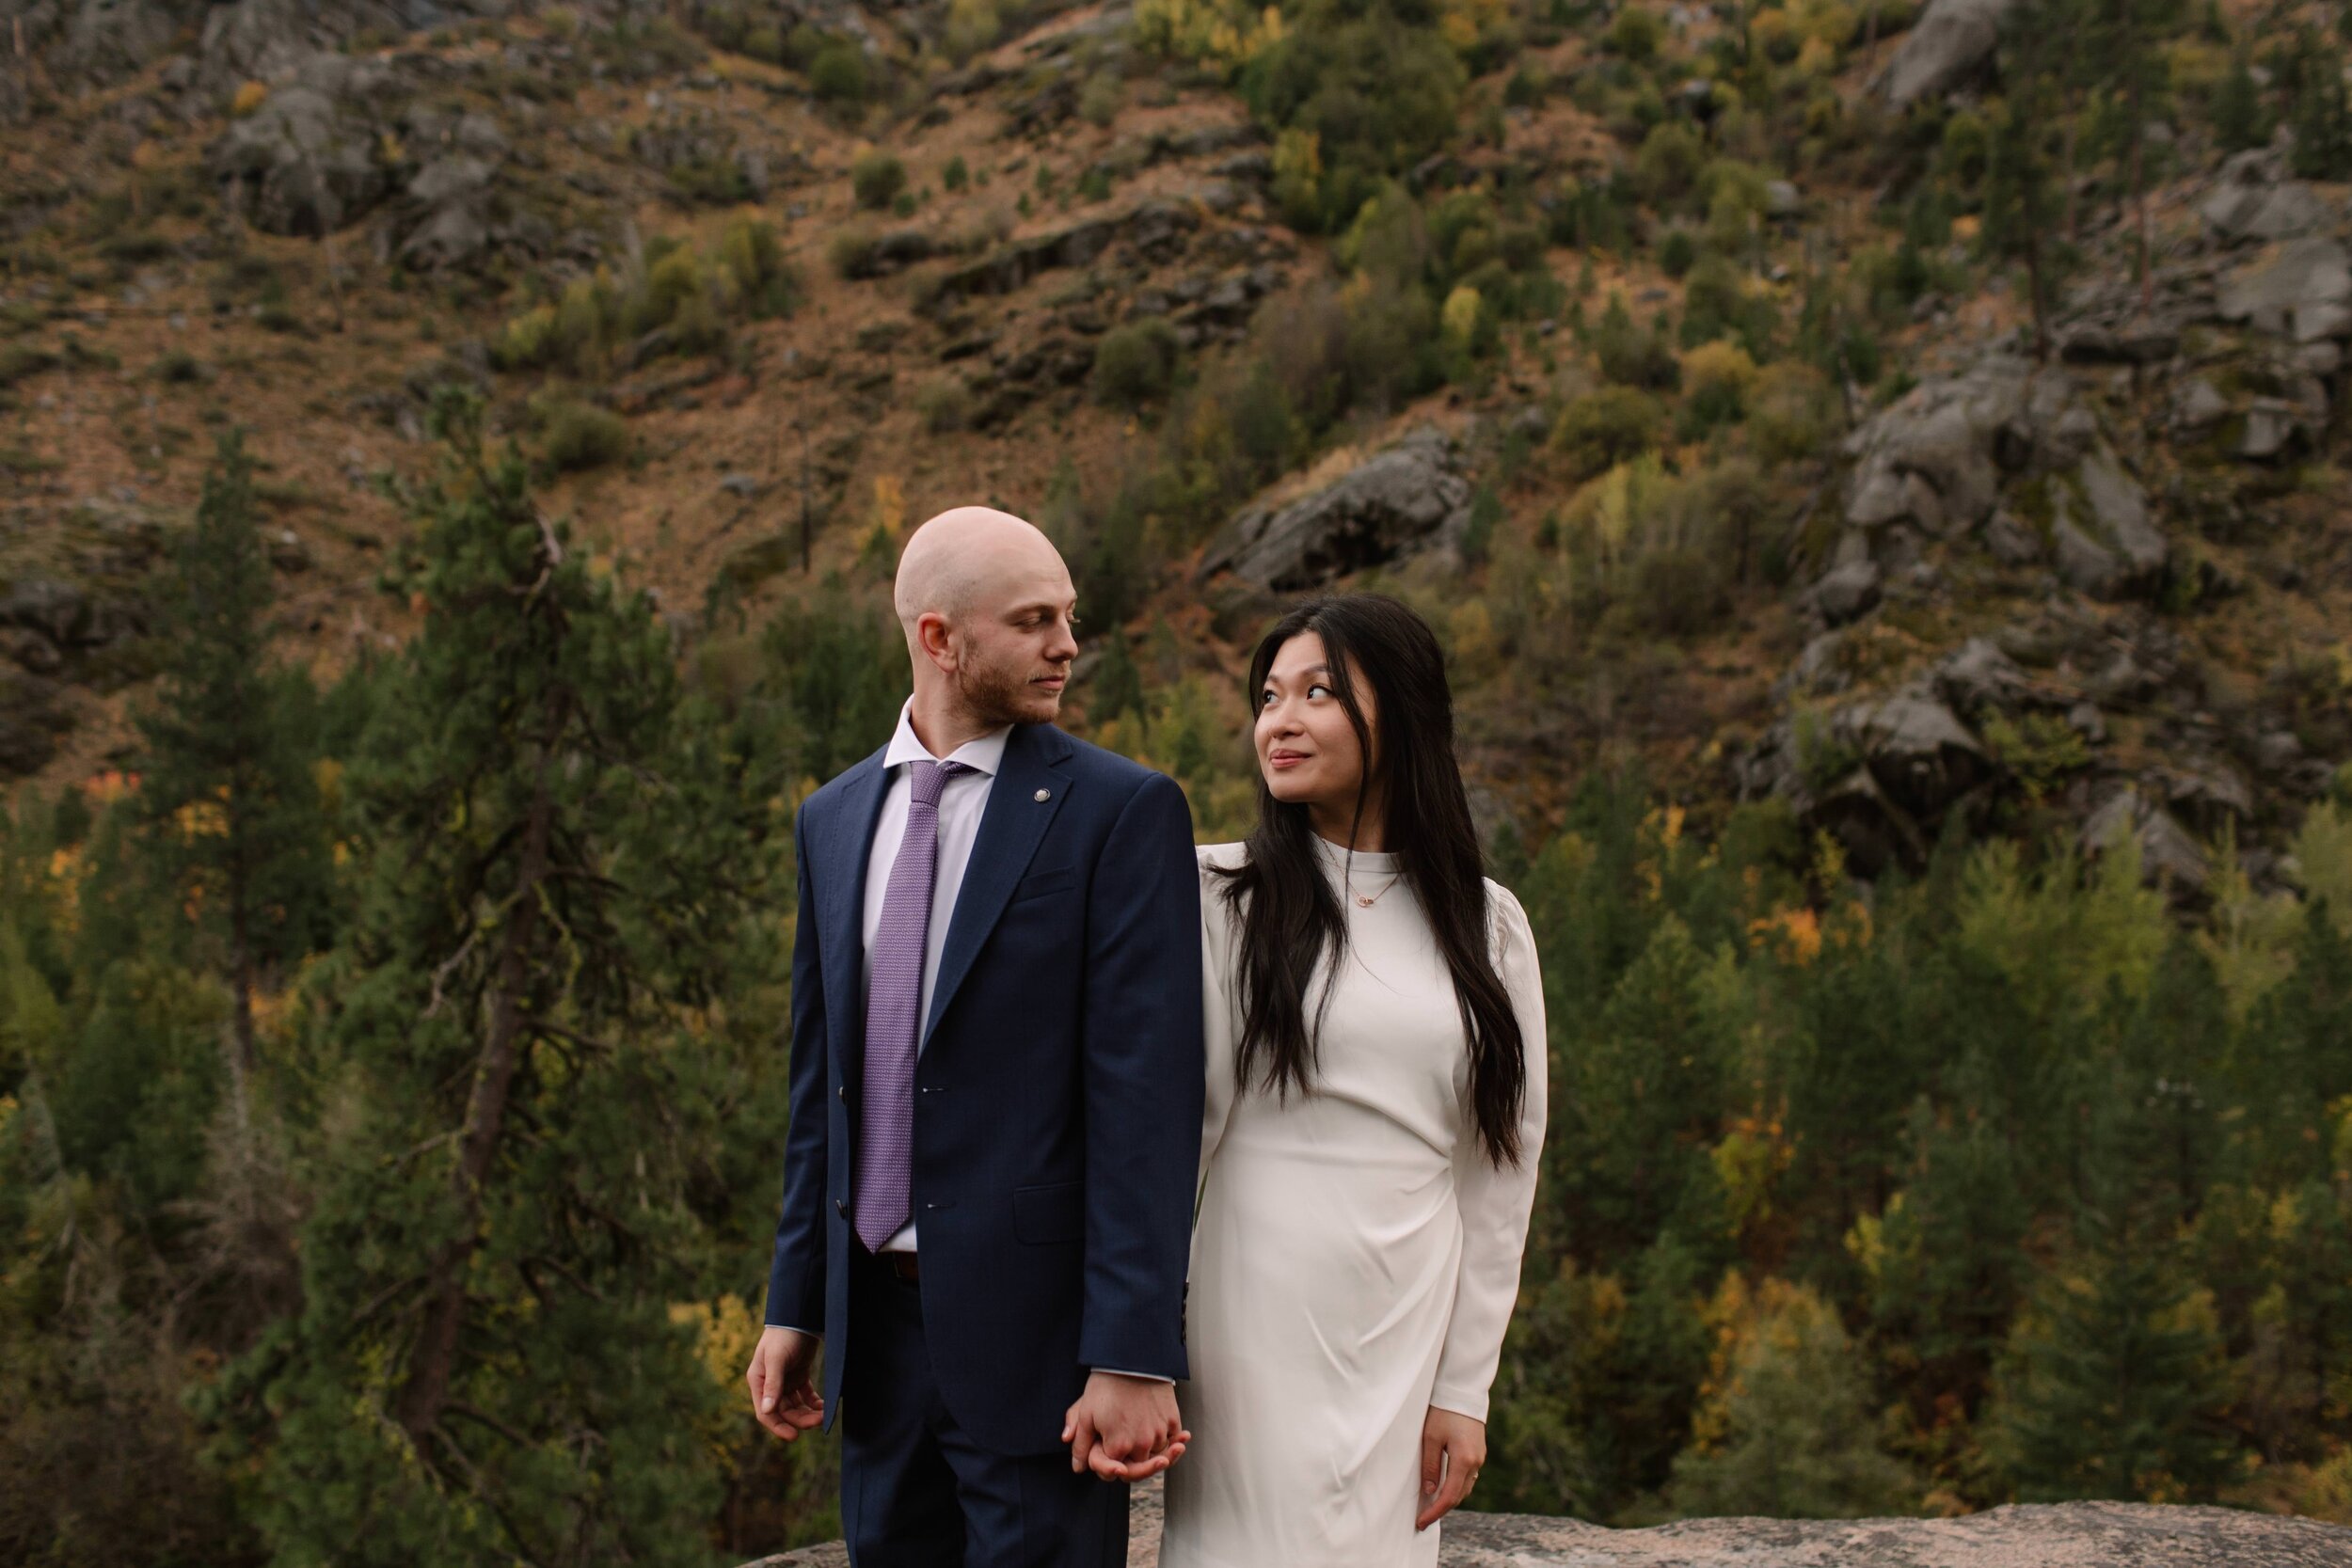 socal-san-diego-southern-california-elopement-small-wedding-outdoor-forest-mountains-waterfall-ceremony-leavenworth-washington-photographer-61.jpg